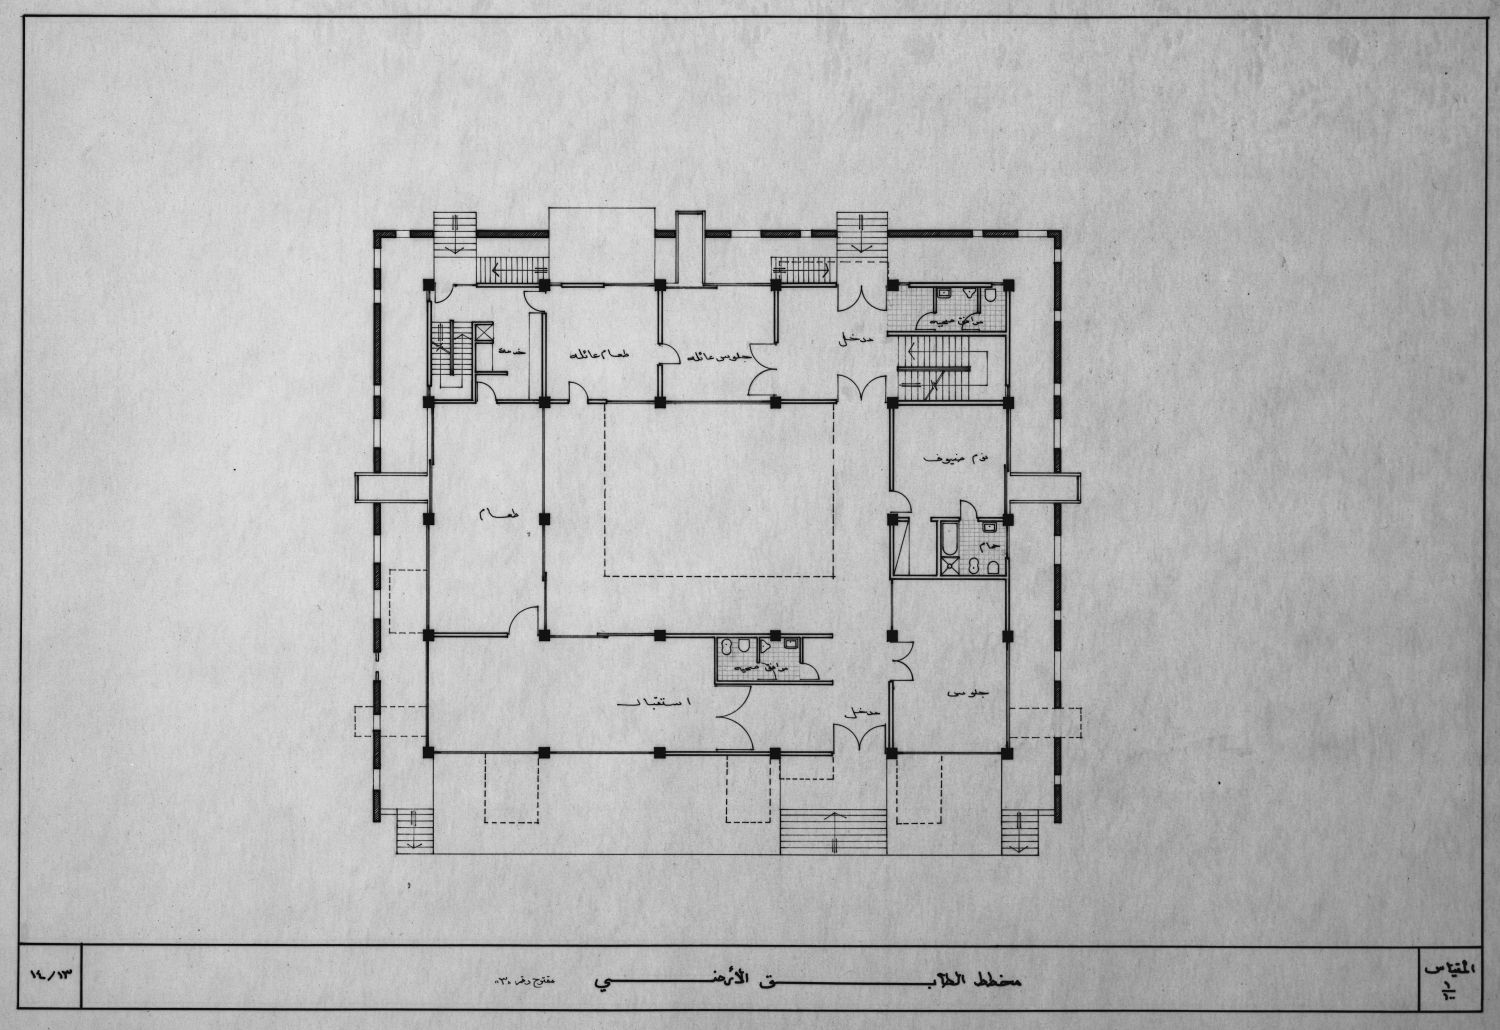 Ground floor plan (alternate version not adopted in final construction).